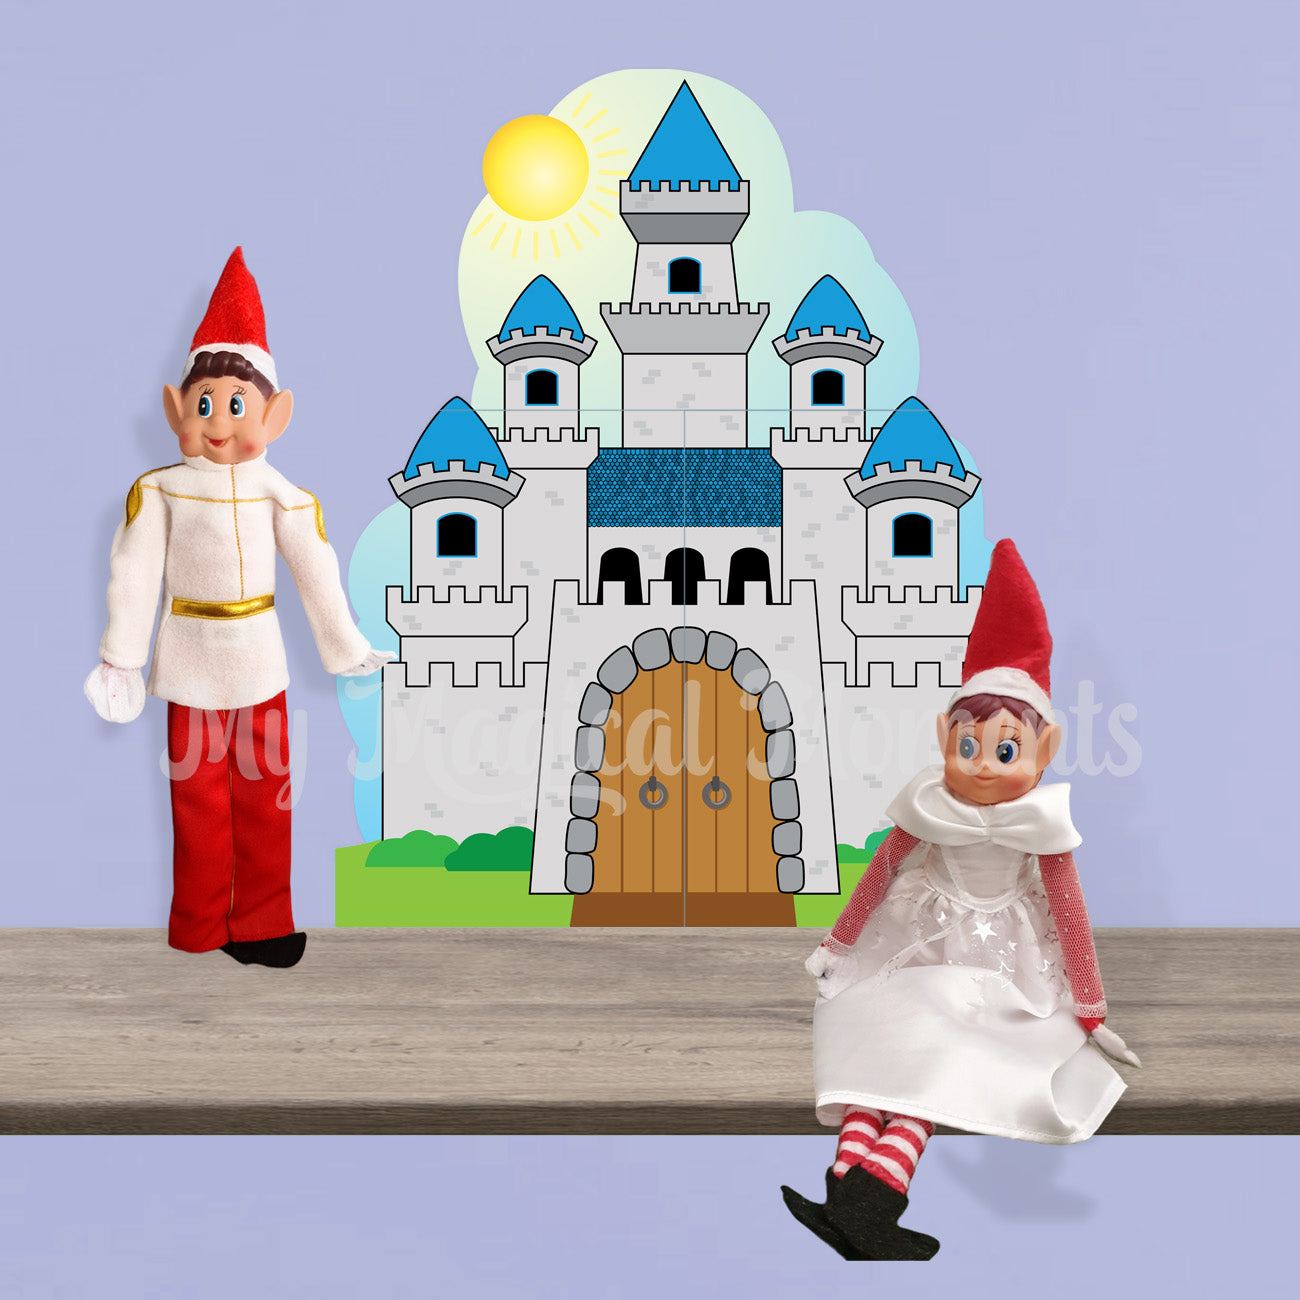 Elves dressed as a prince and princess with their own castle